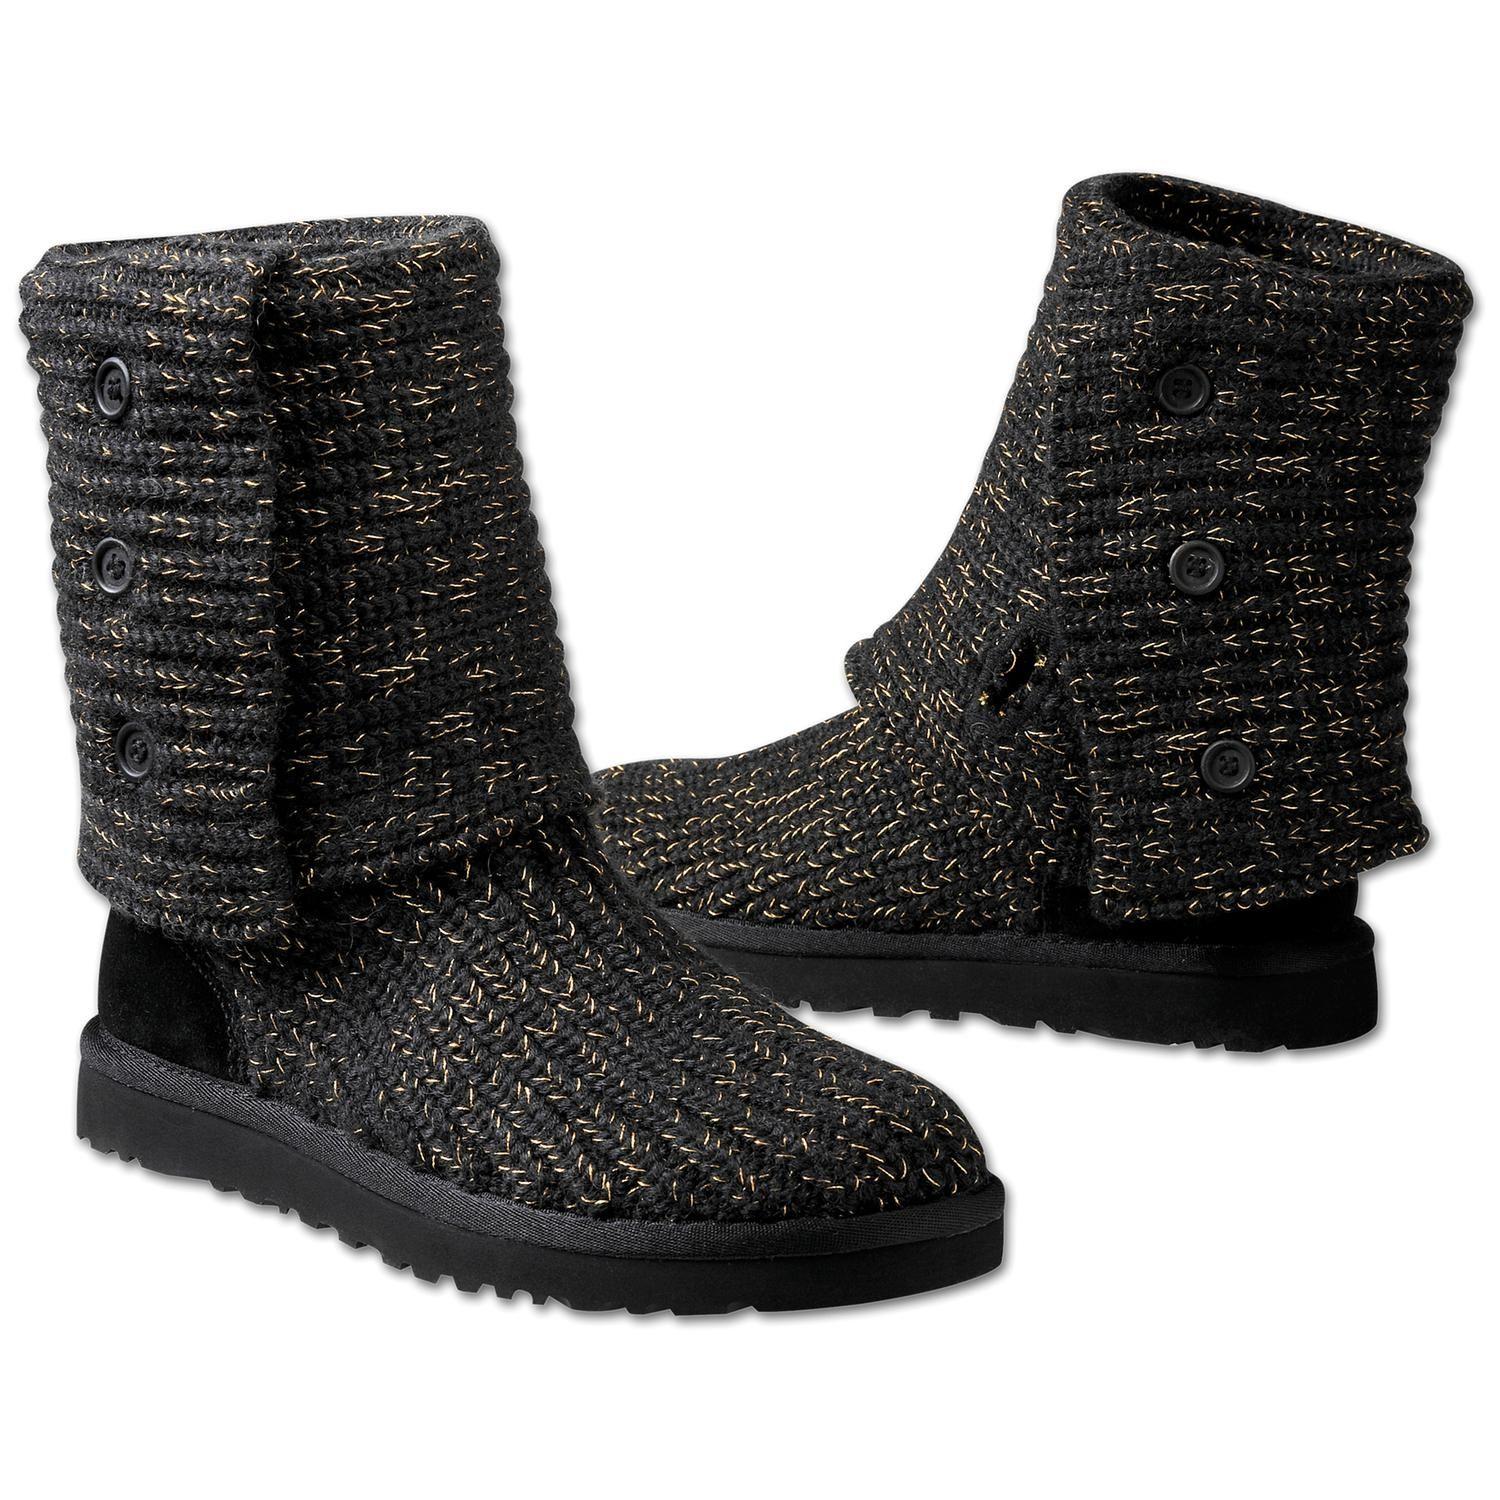 Athleta Classic Cardy Boot By Ugg® Australia in Brown | Lyst